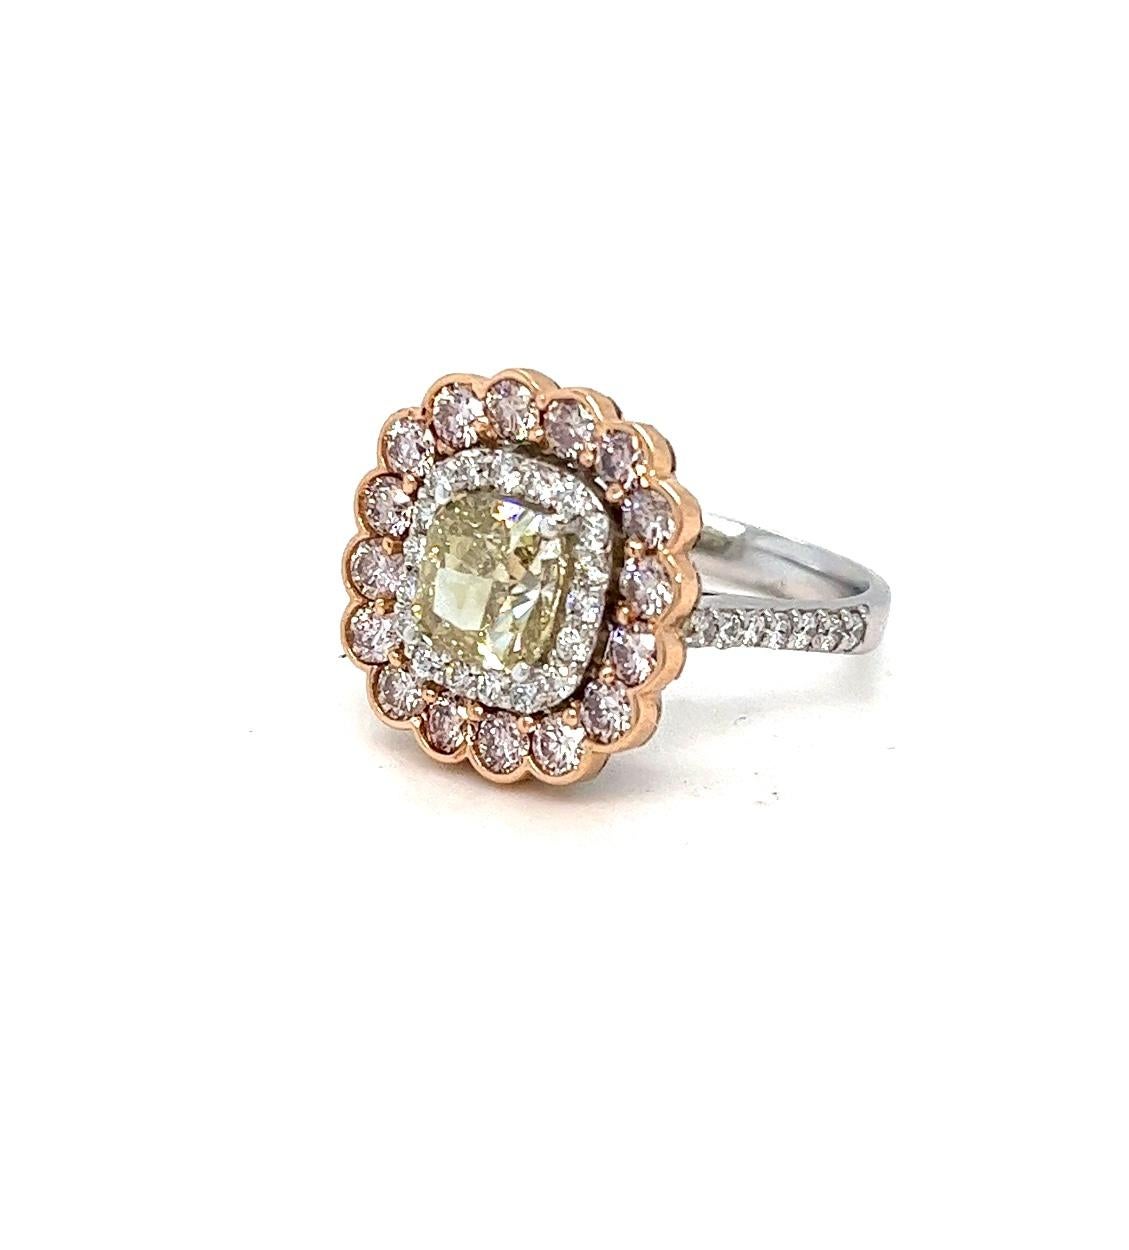 Natural Yellow  Cushion Diamond in Pink & White Diamond Halo Ring, 3.29 ctw. For Sale 3